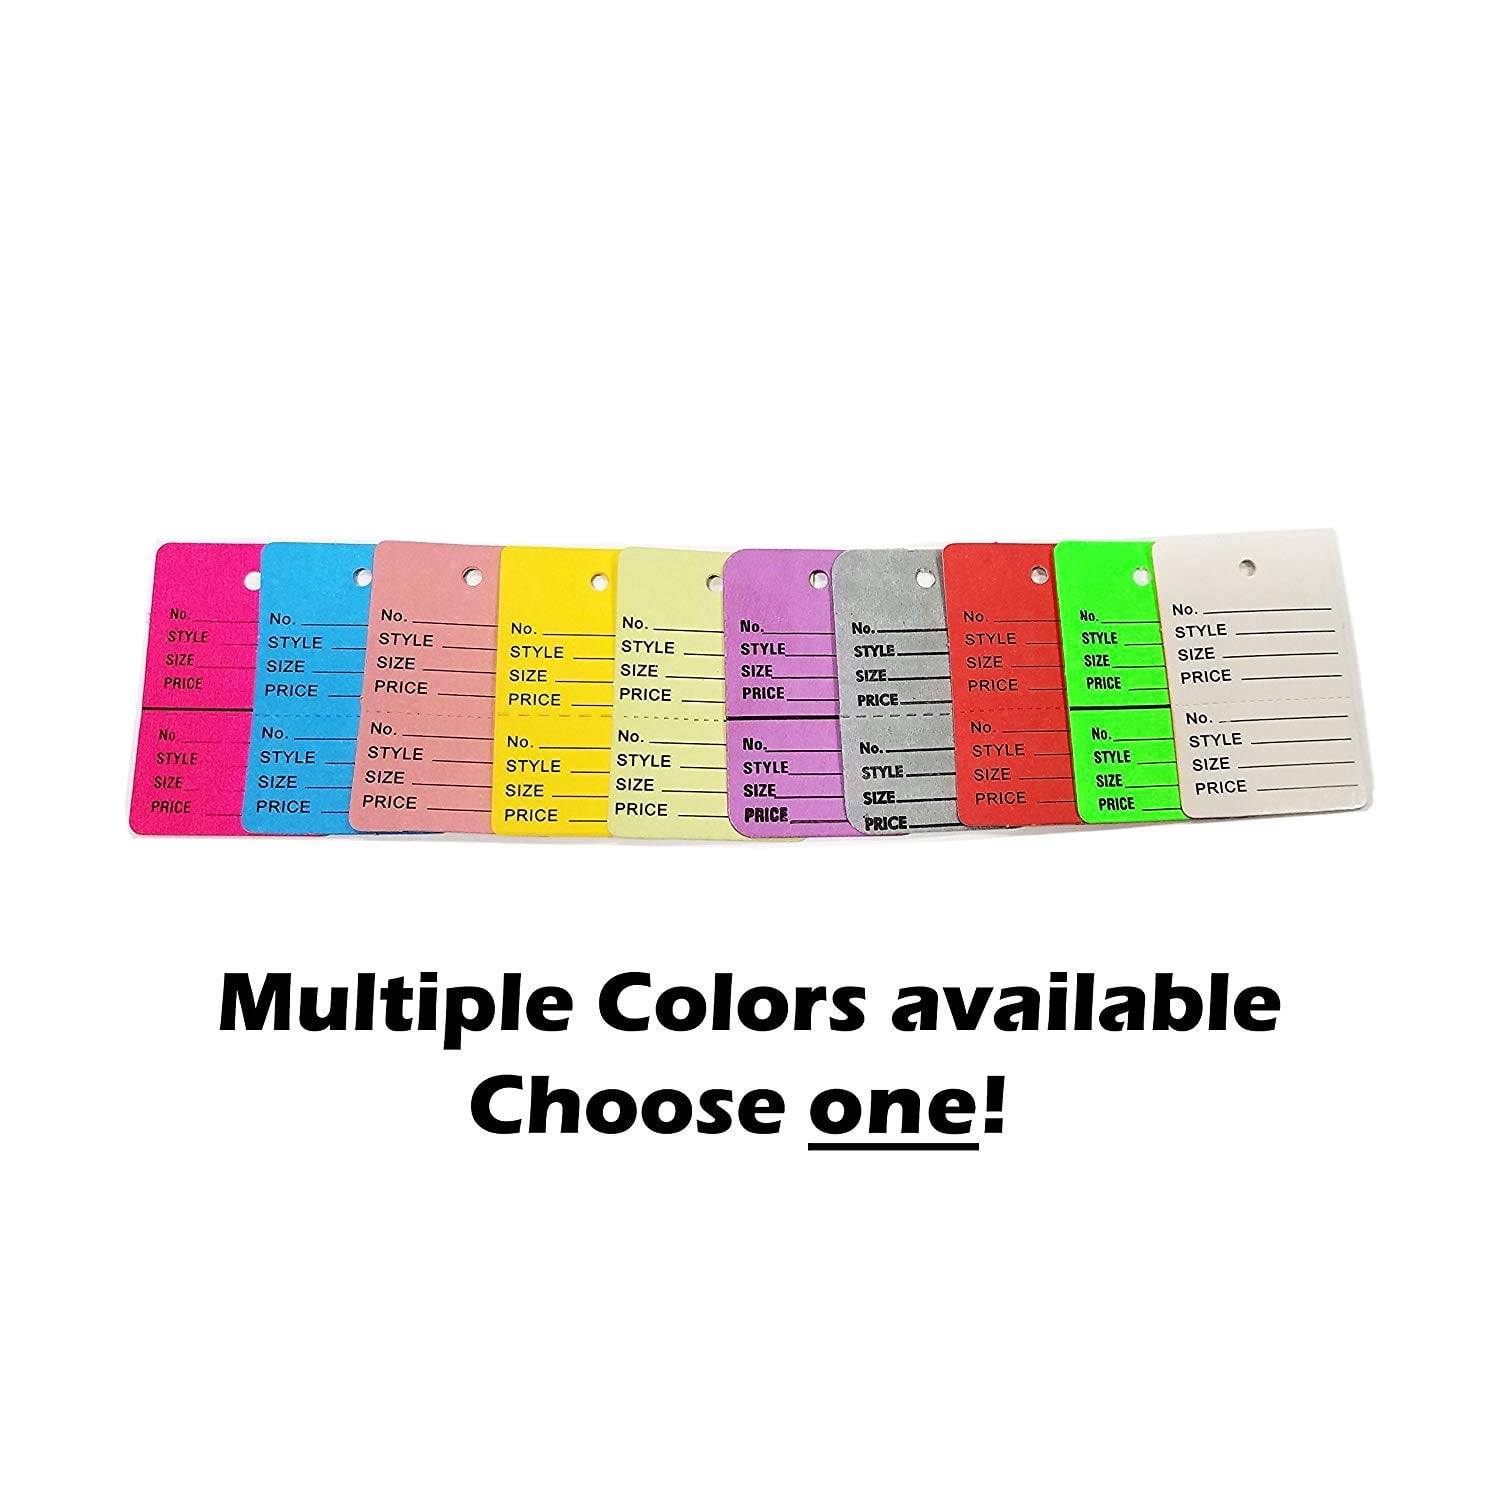 1000 Small Perforated Merchandise Coupon Price Tags Light Green 